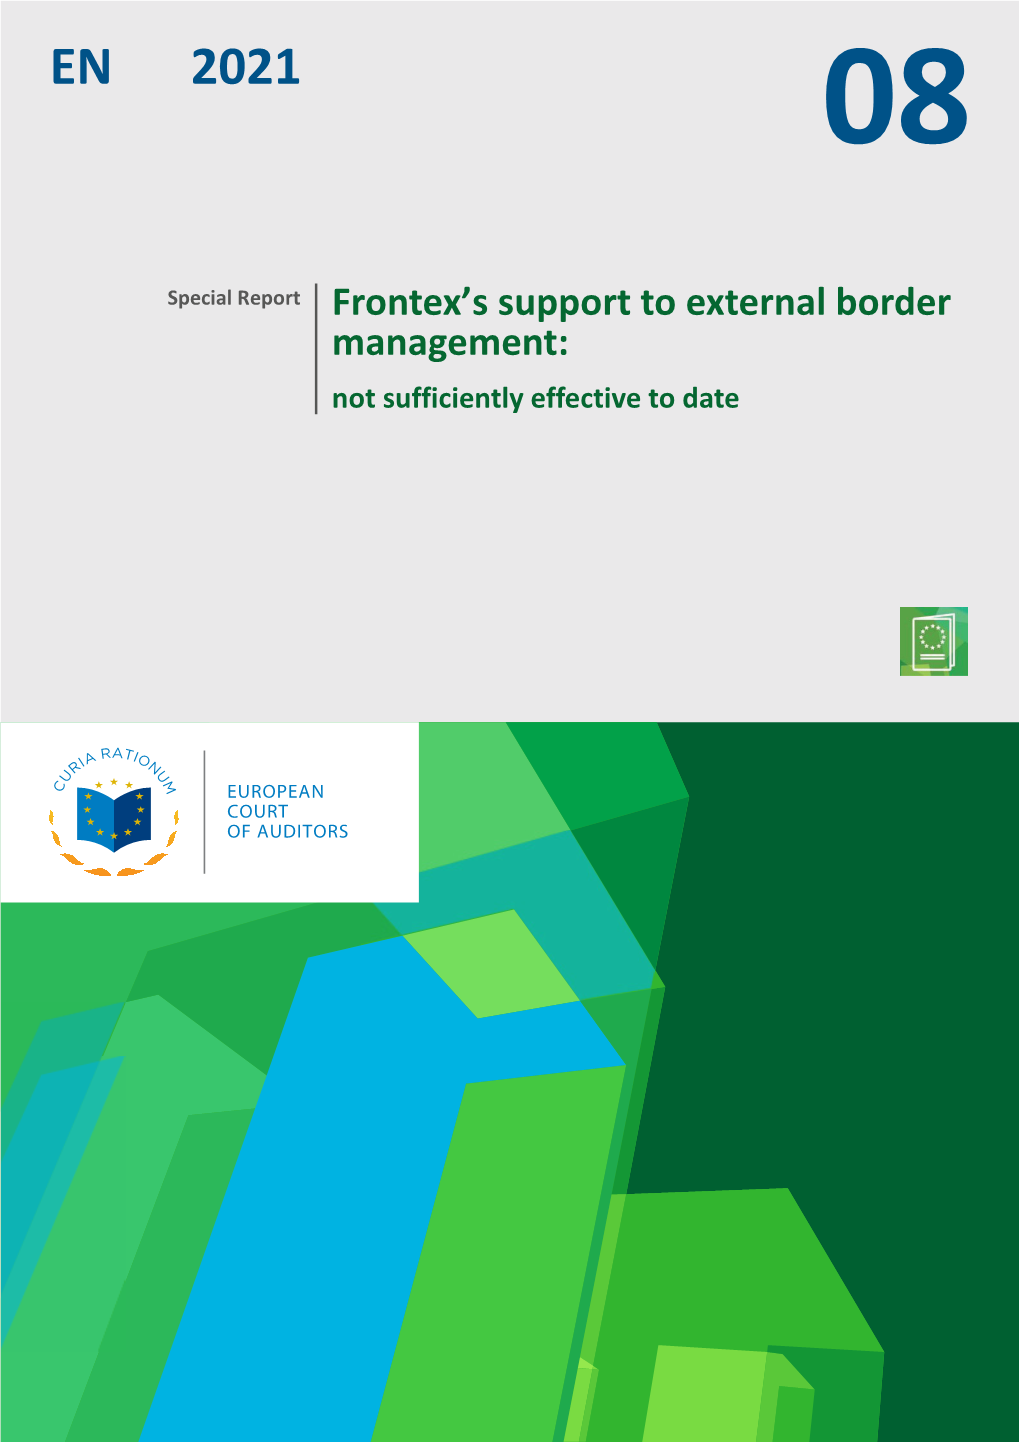 Frontex's Support to External Border Management